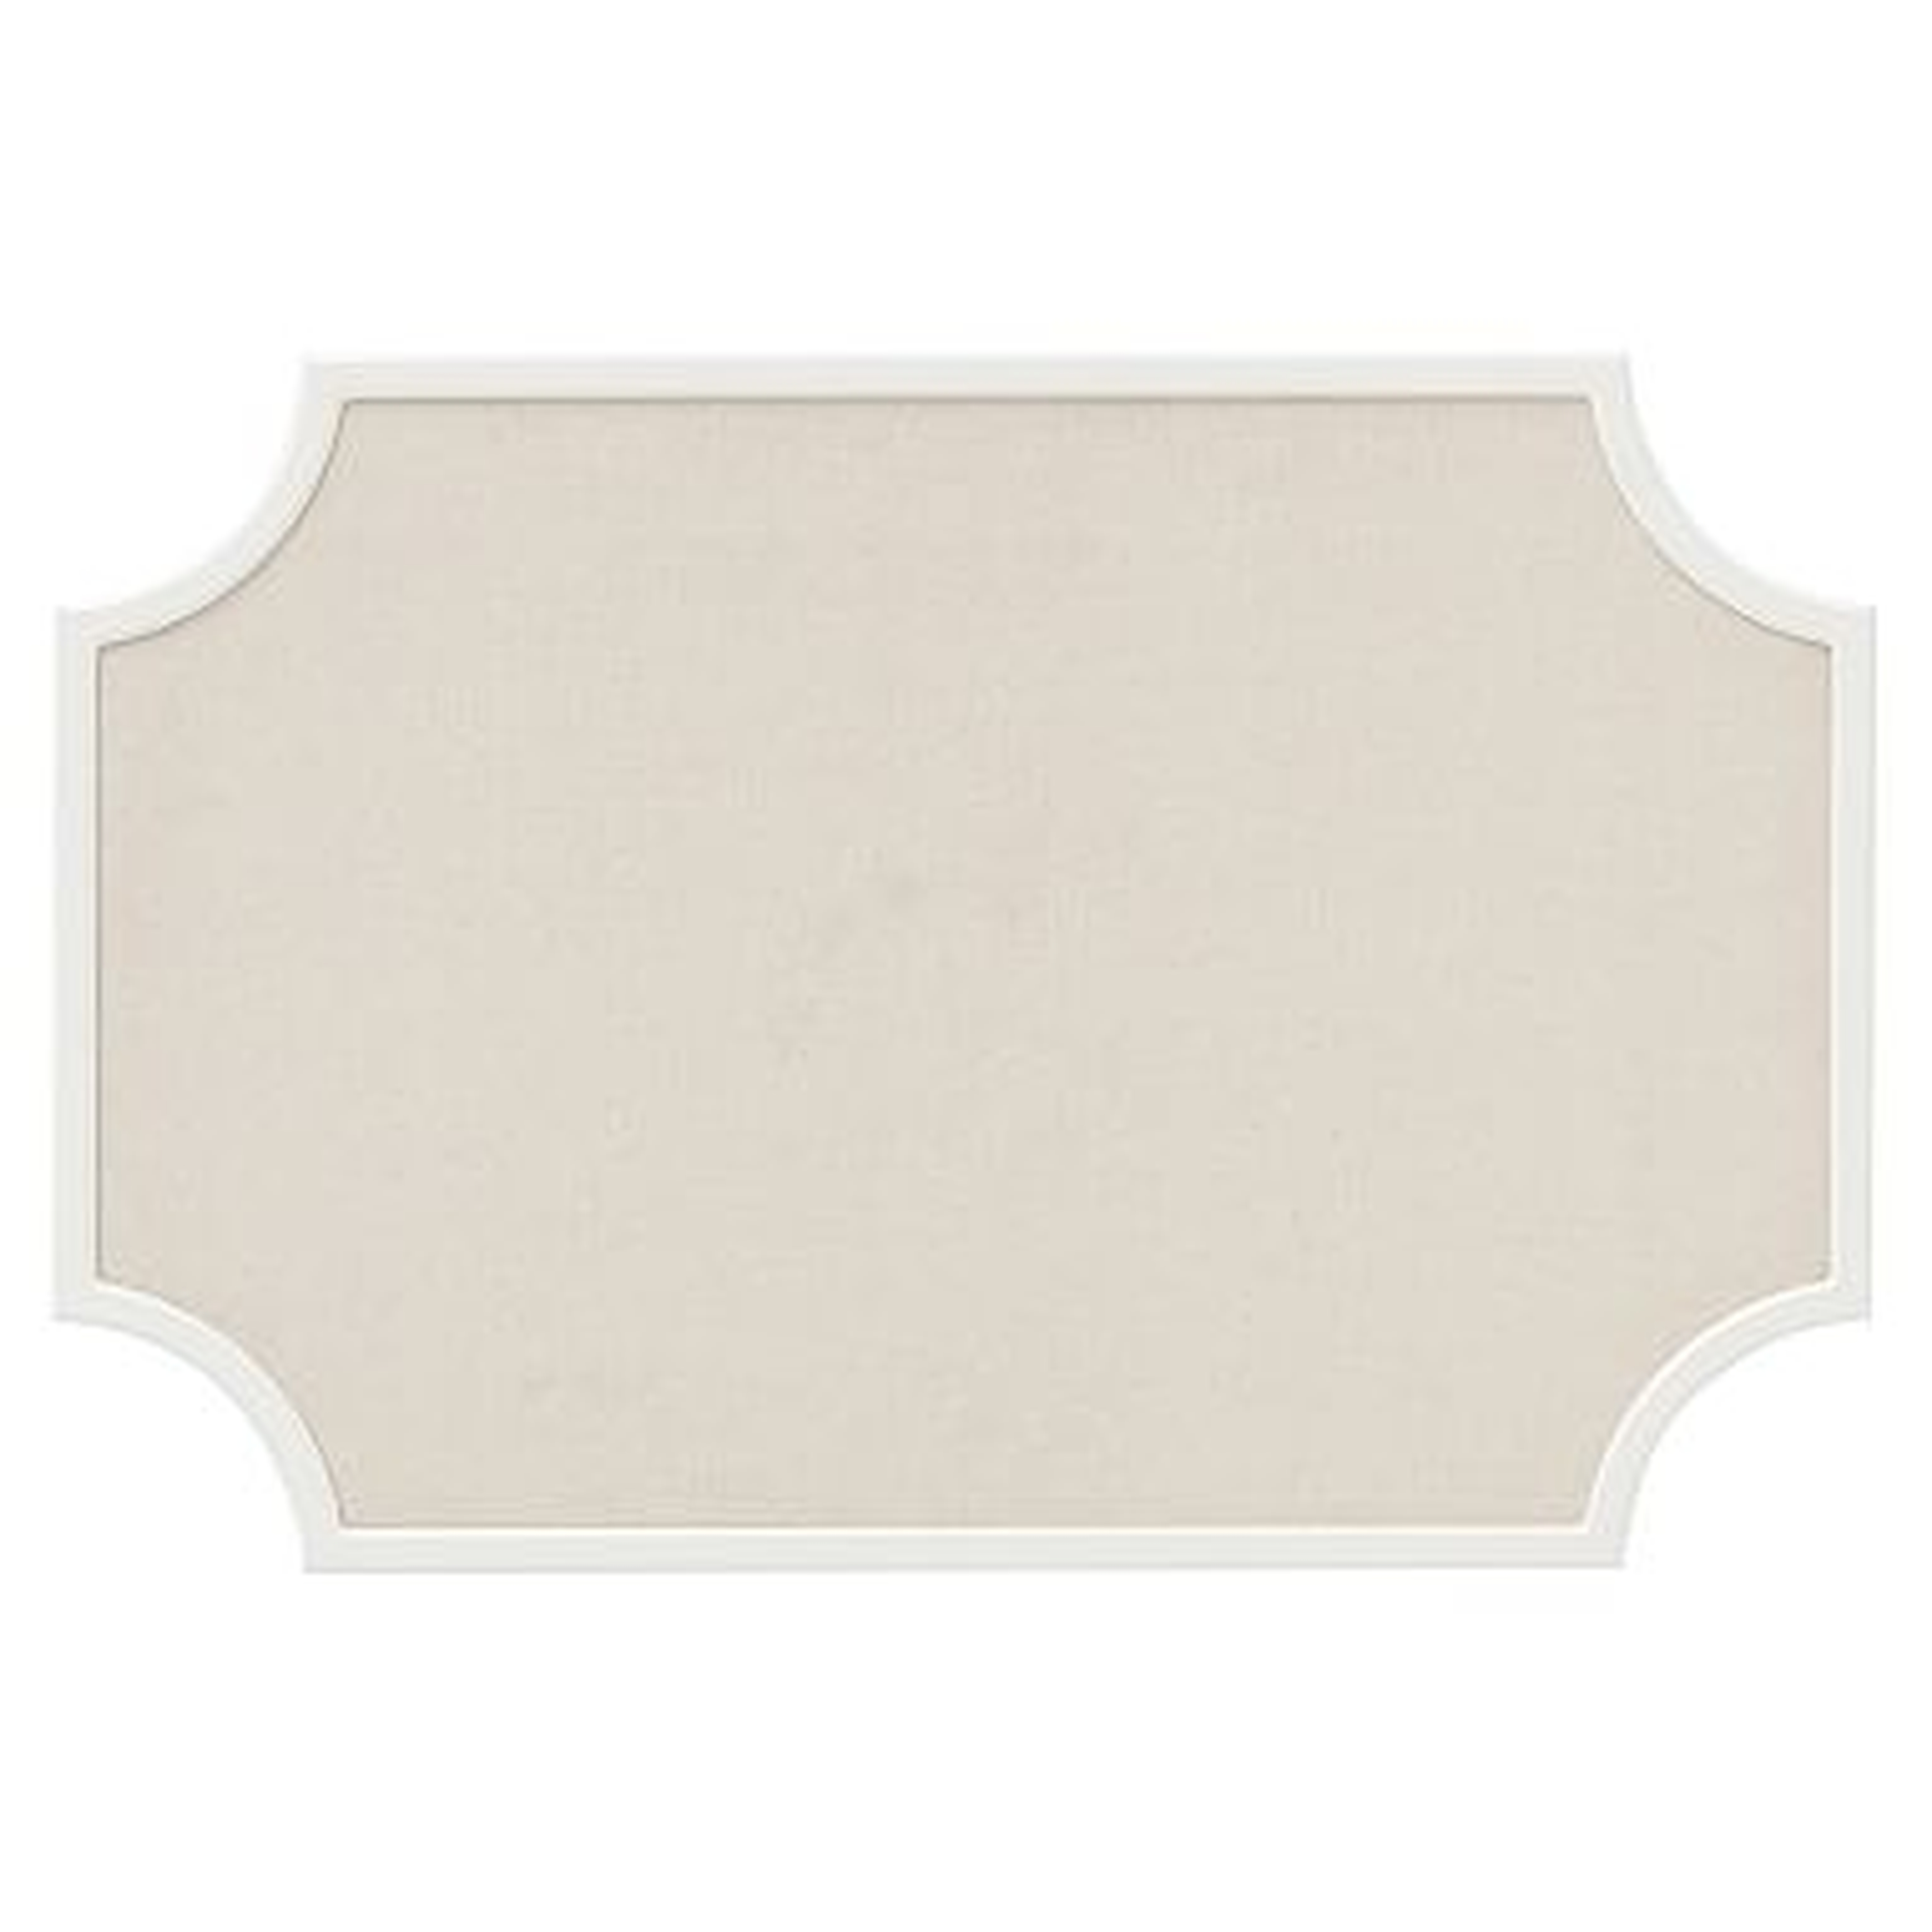 No Nails Scallop Framed Pinboard, 24"x36", Simply White - Pottery Barn Teen